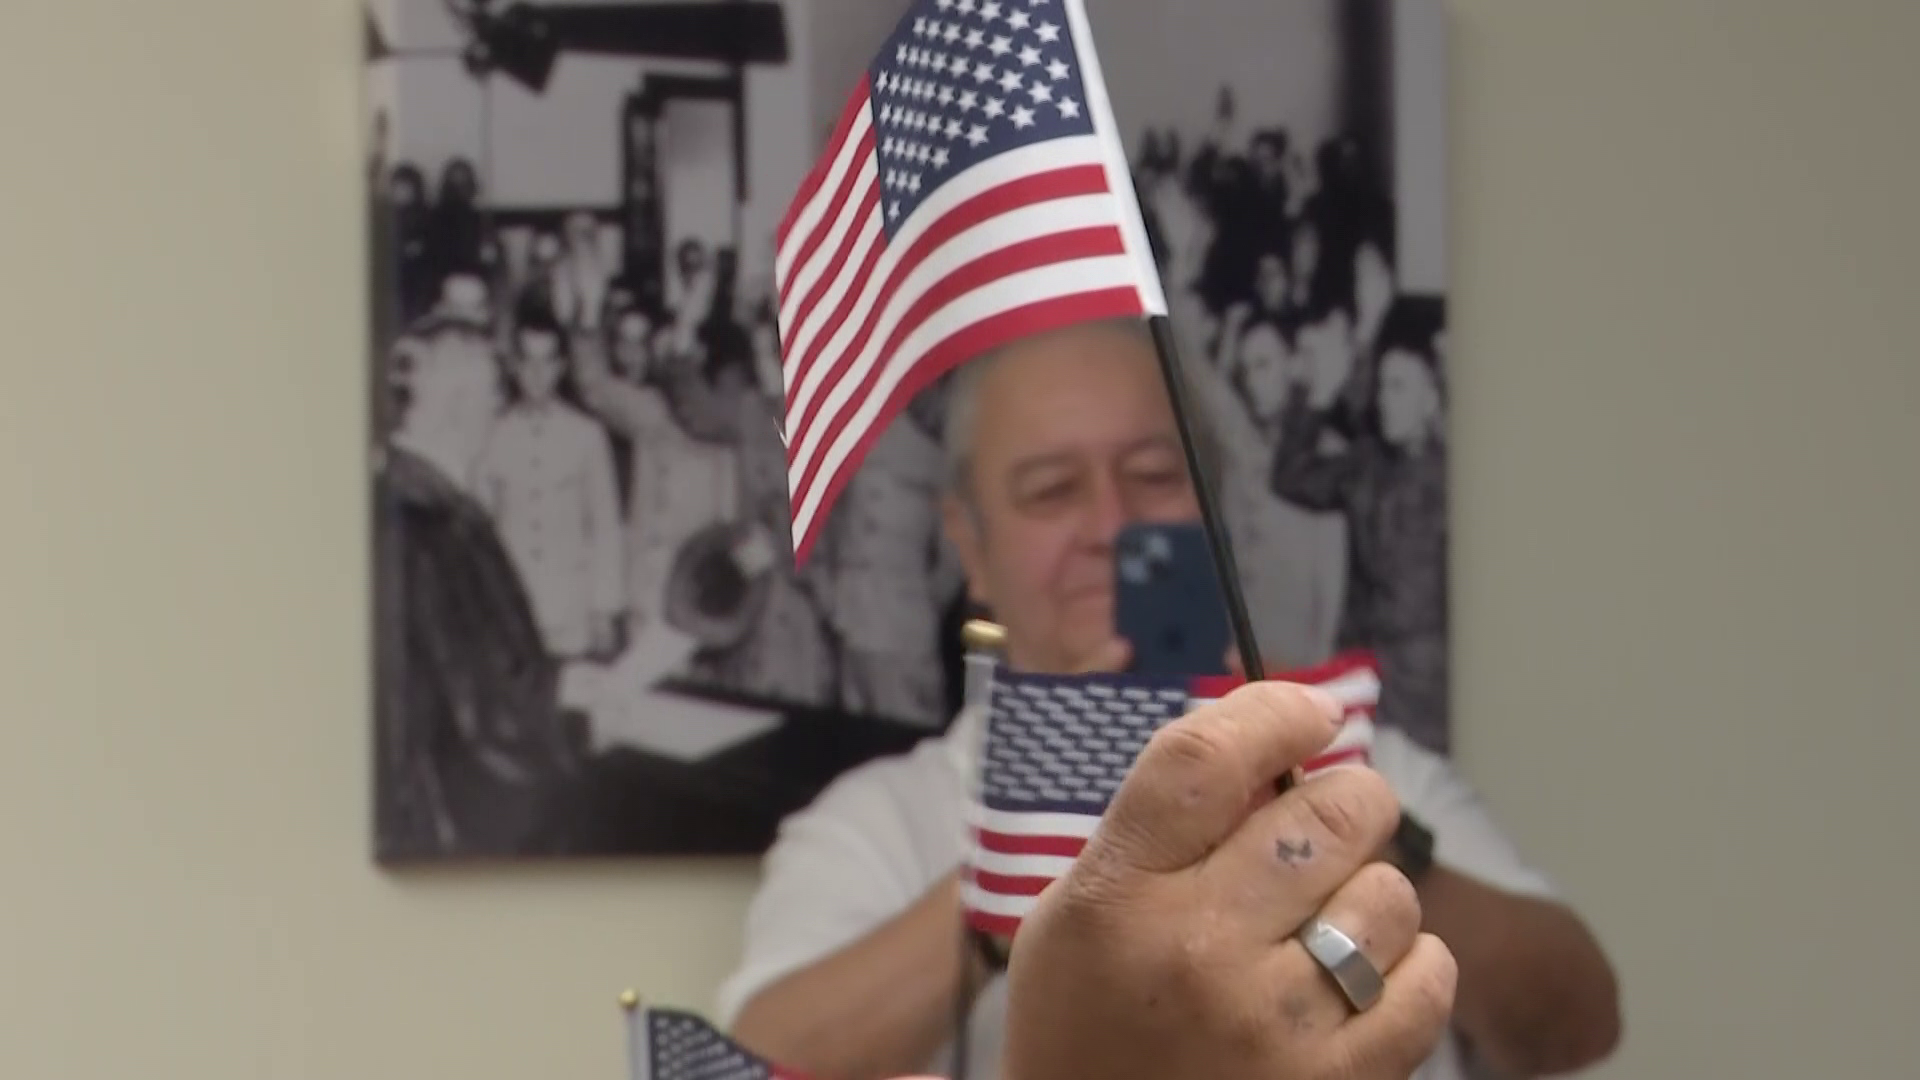 Becoming an American citizen on the eve of Independence Day